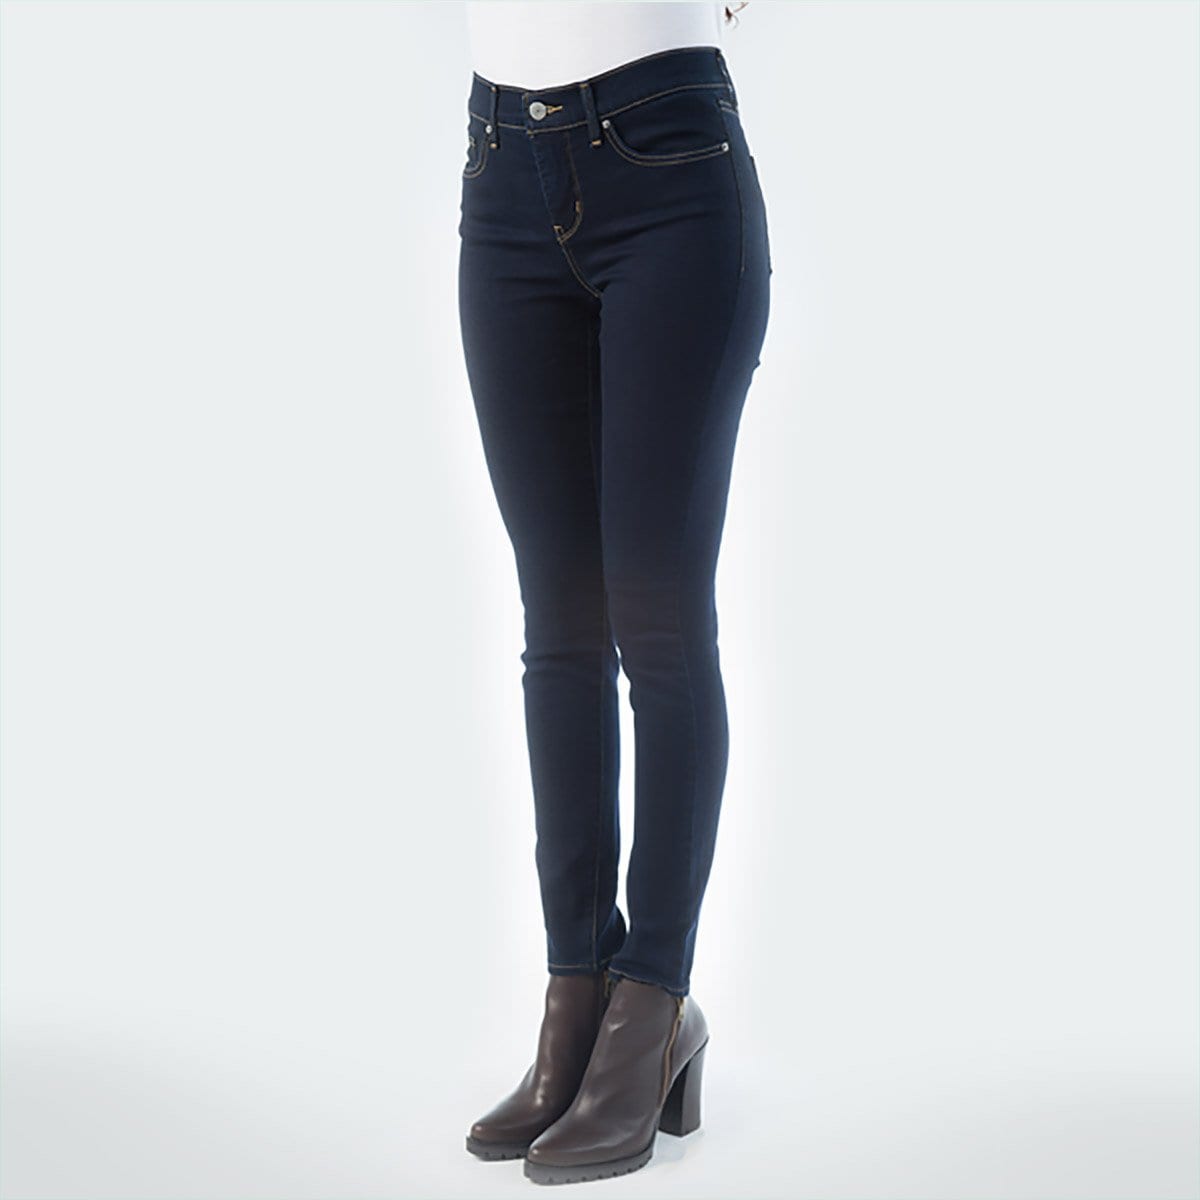 Jeans 311 Shaping Skinny Levi's para Mujer